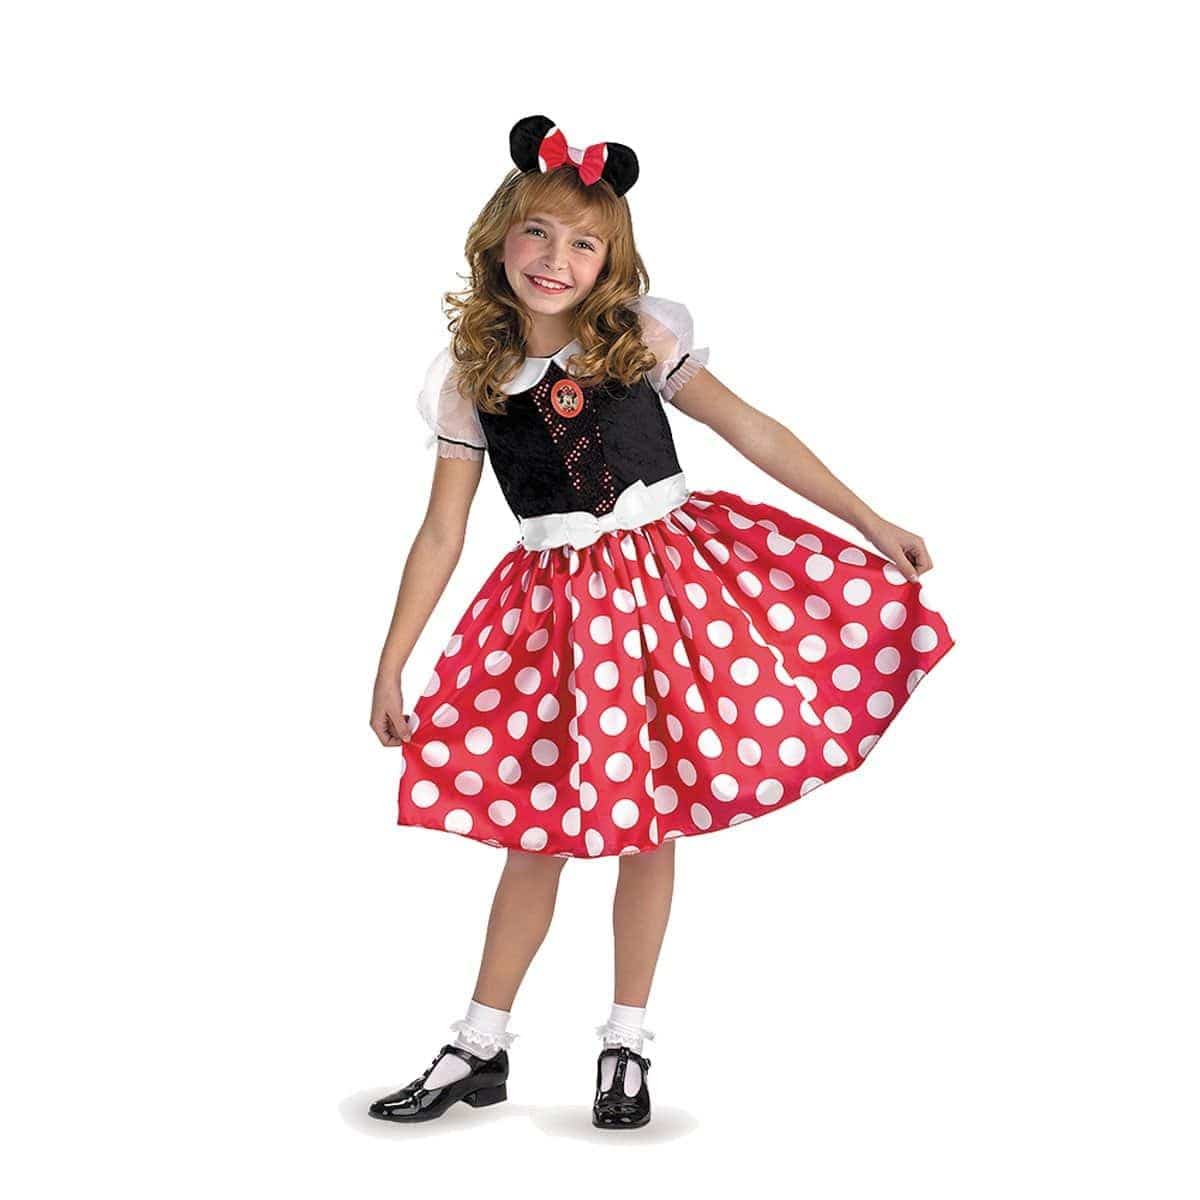 Buy Costumes Minnie Mouse Classic Costume for Kids, Disney sold at Party Expert